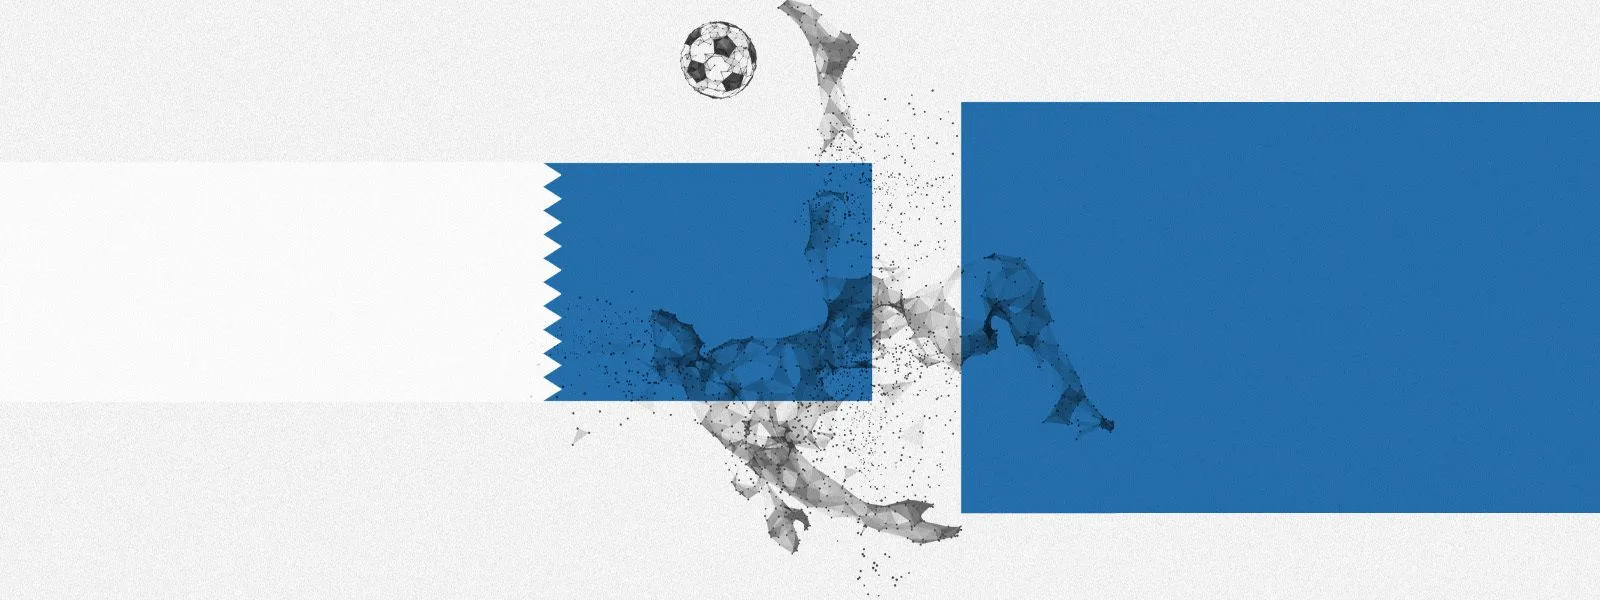 Fielding Threats: Cyber, Influence, and Physical Threats to the 2022 FIFA World Cup in Qatar